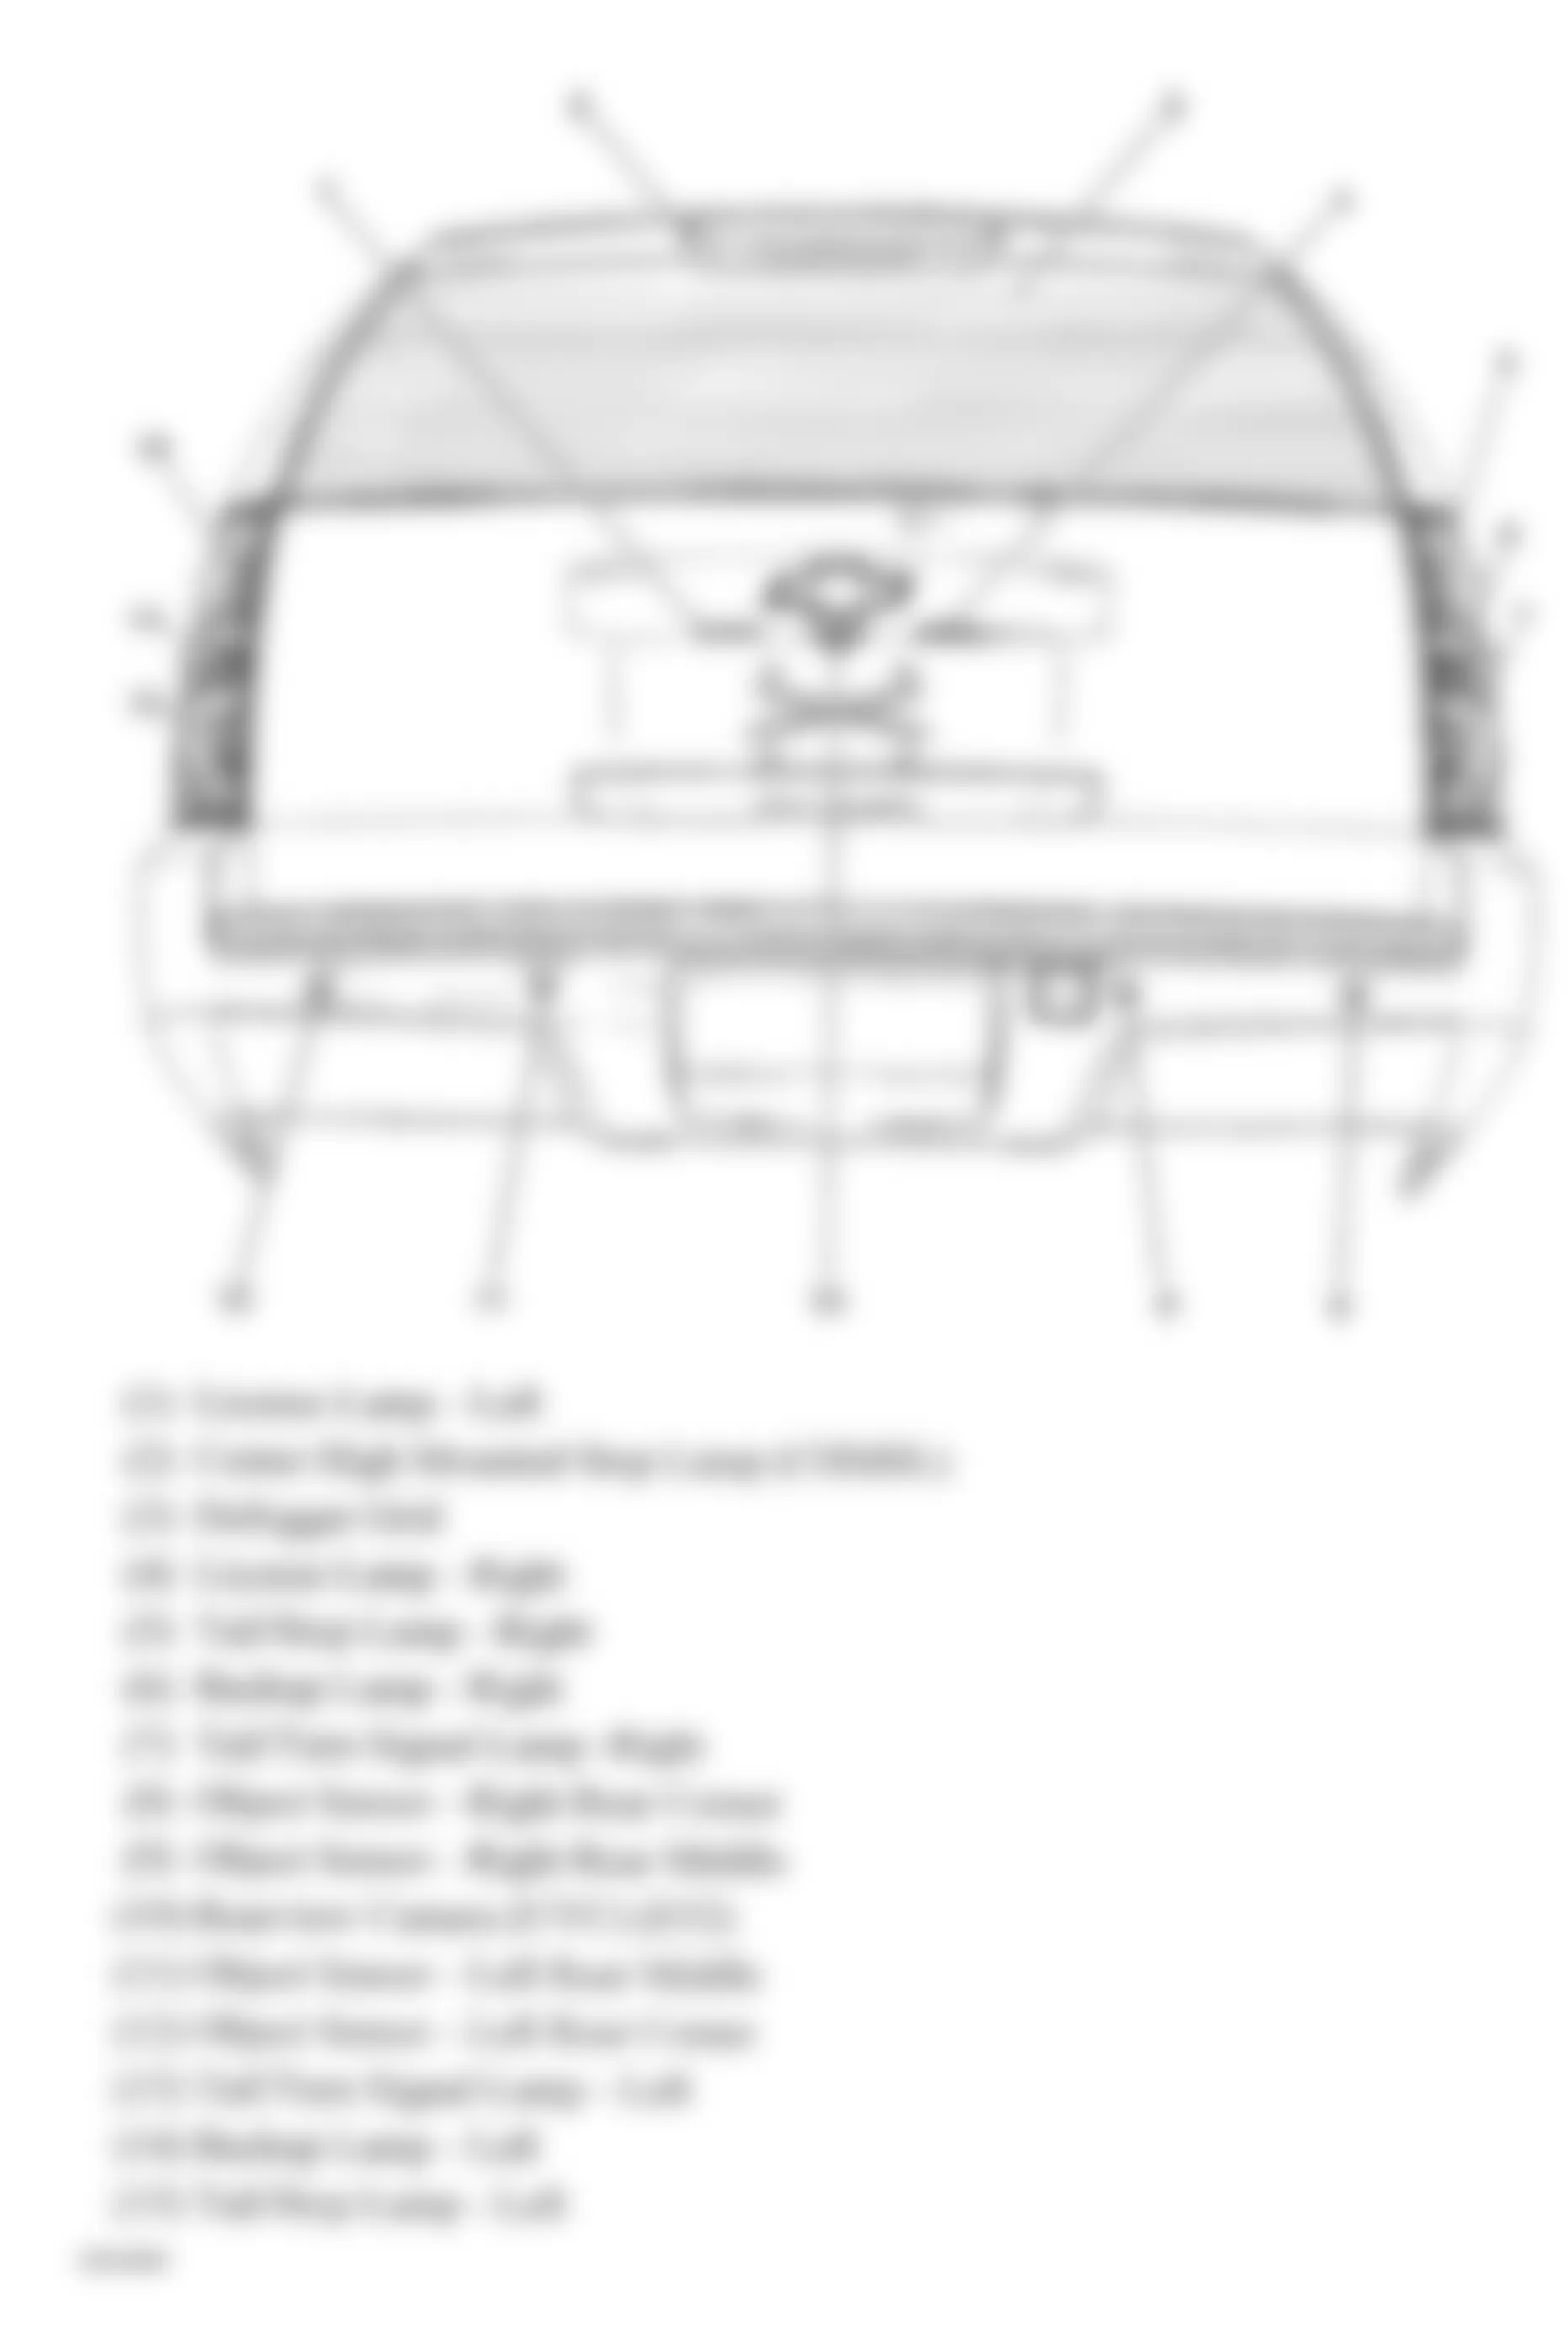 GMC Yukon 2008 - Component Locations -  Rear Of Vehicle (Avalanche, Suburban & Tahoe W/One Piece Liftgate)